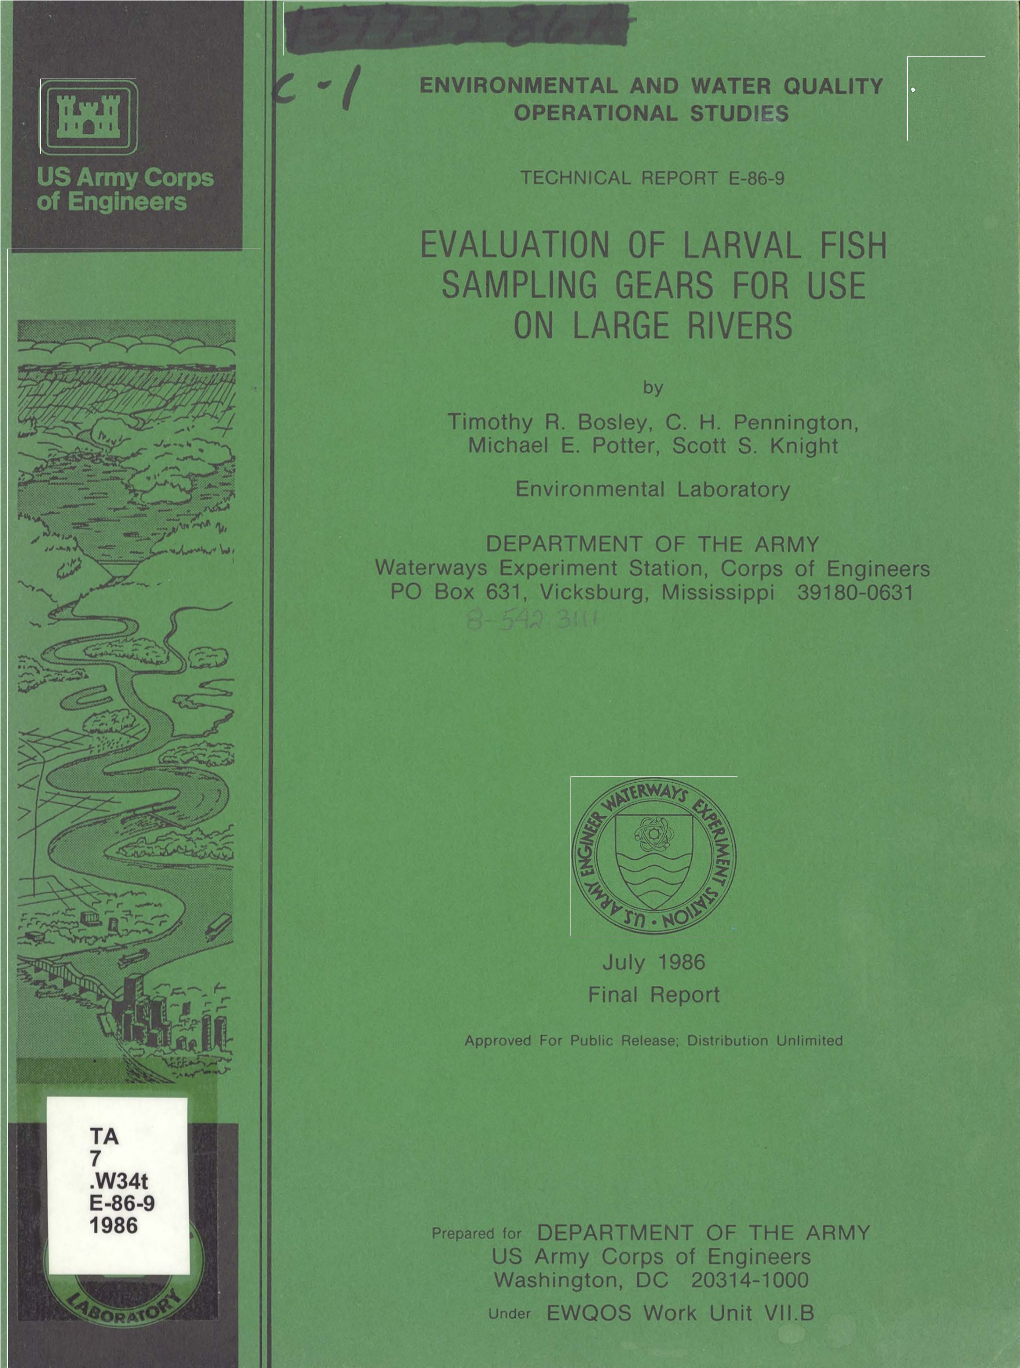 Evaluation of Larval Fish Sampling Gears for Use on Large Rivers